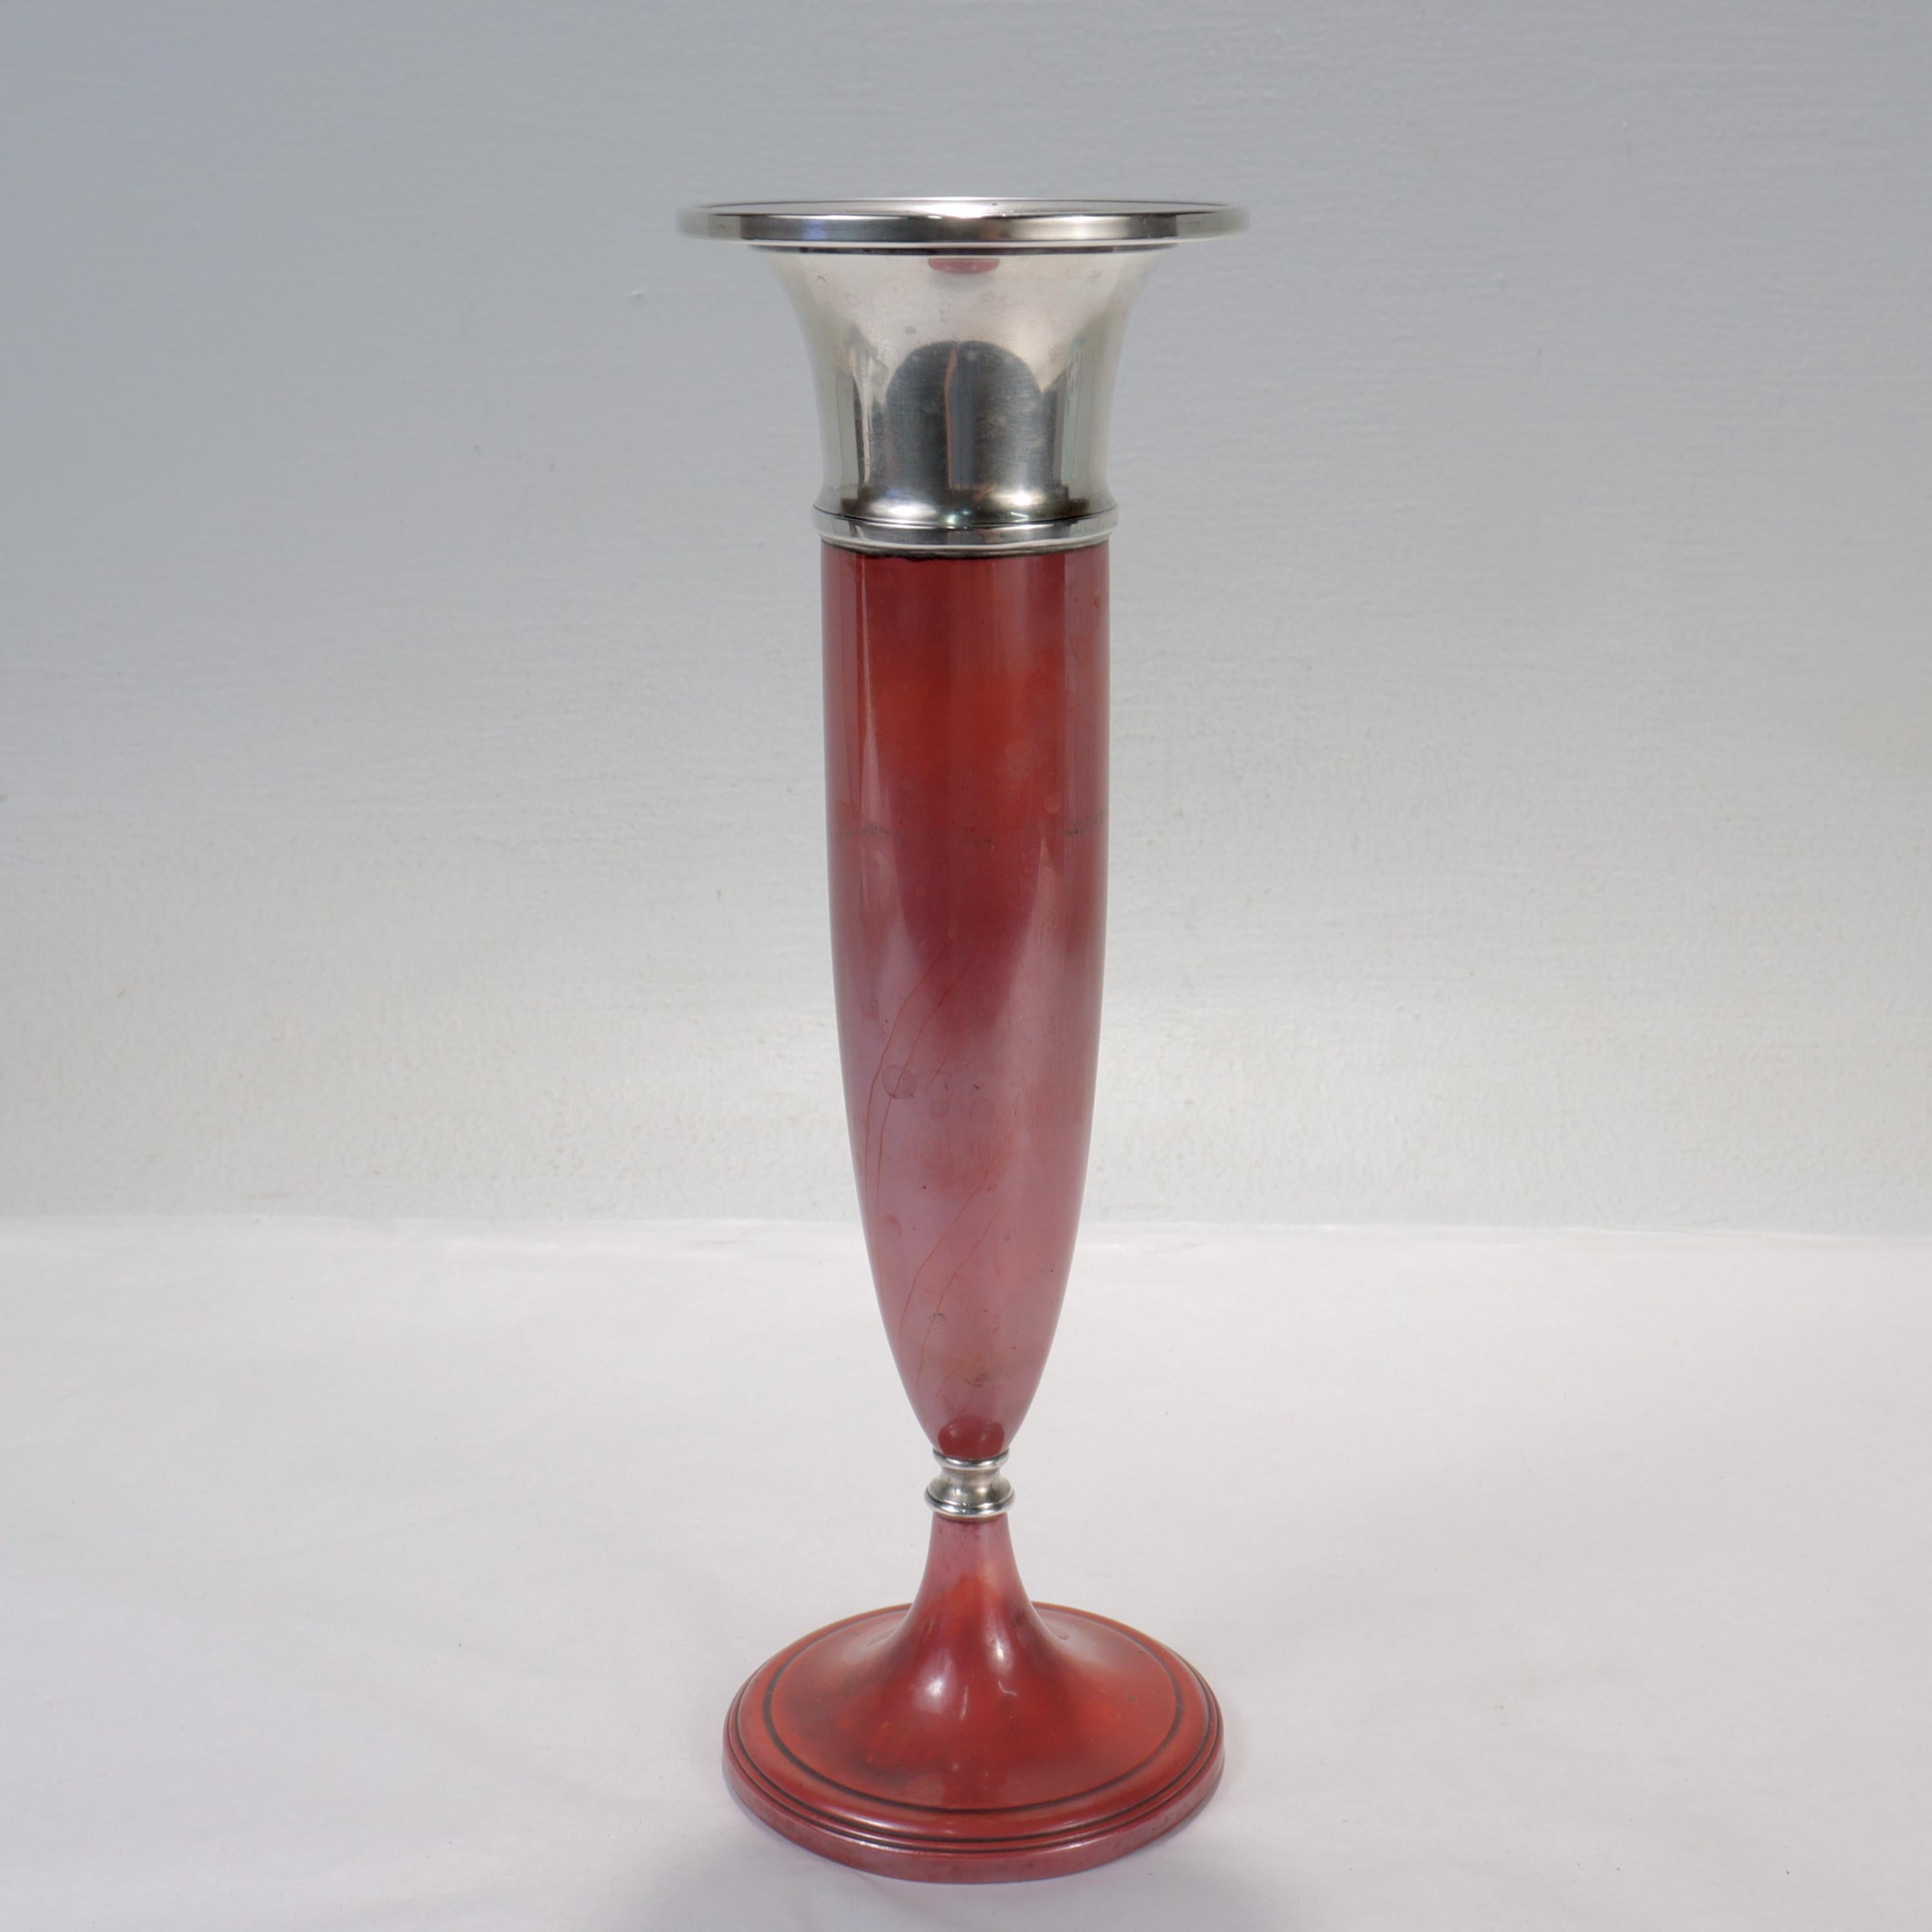 A fine Art Deco mixed metals vase.

From the La Pierre Manufacturing Company's 'Babylonian' line. 

In sterling silver and copper.

Consisting of a copper body with a wide sterling silver neck and rim and a sterling silver ferrule. 

With a lovely